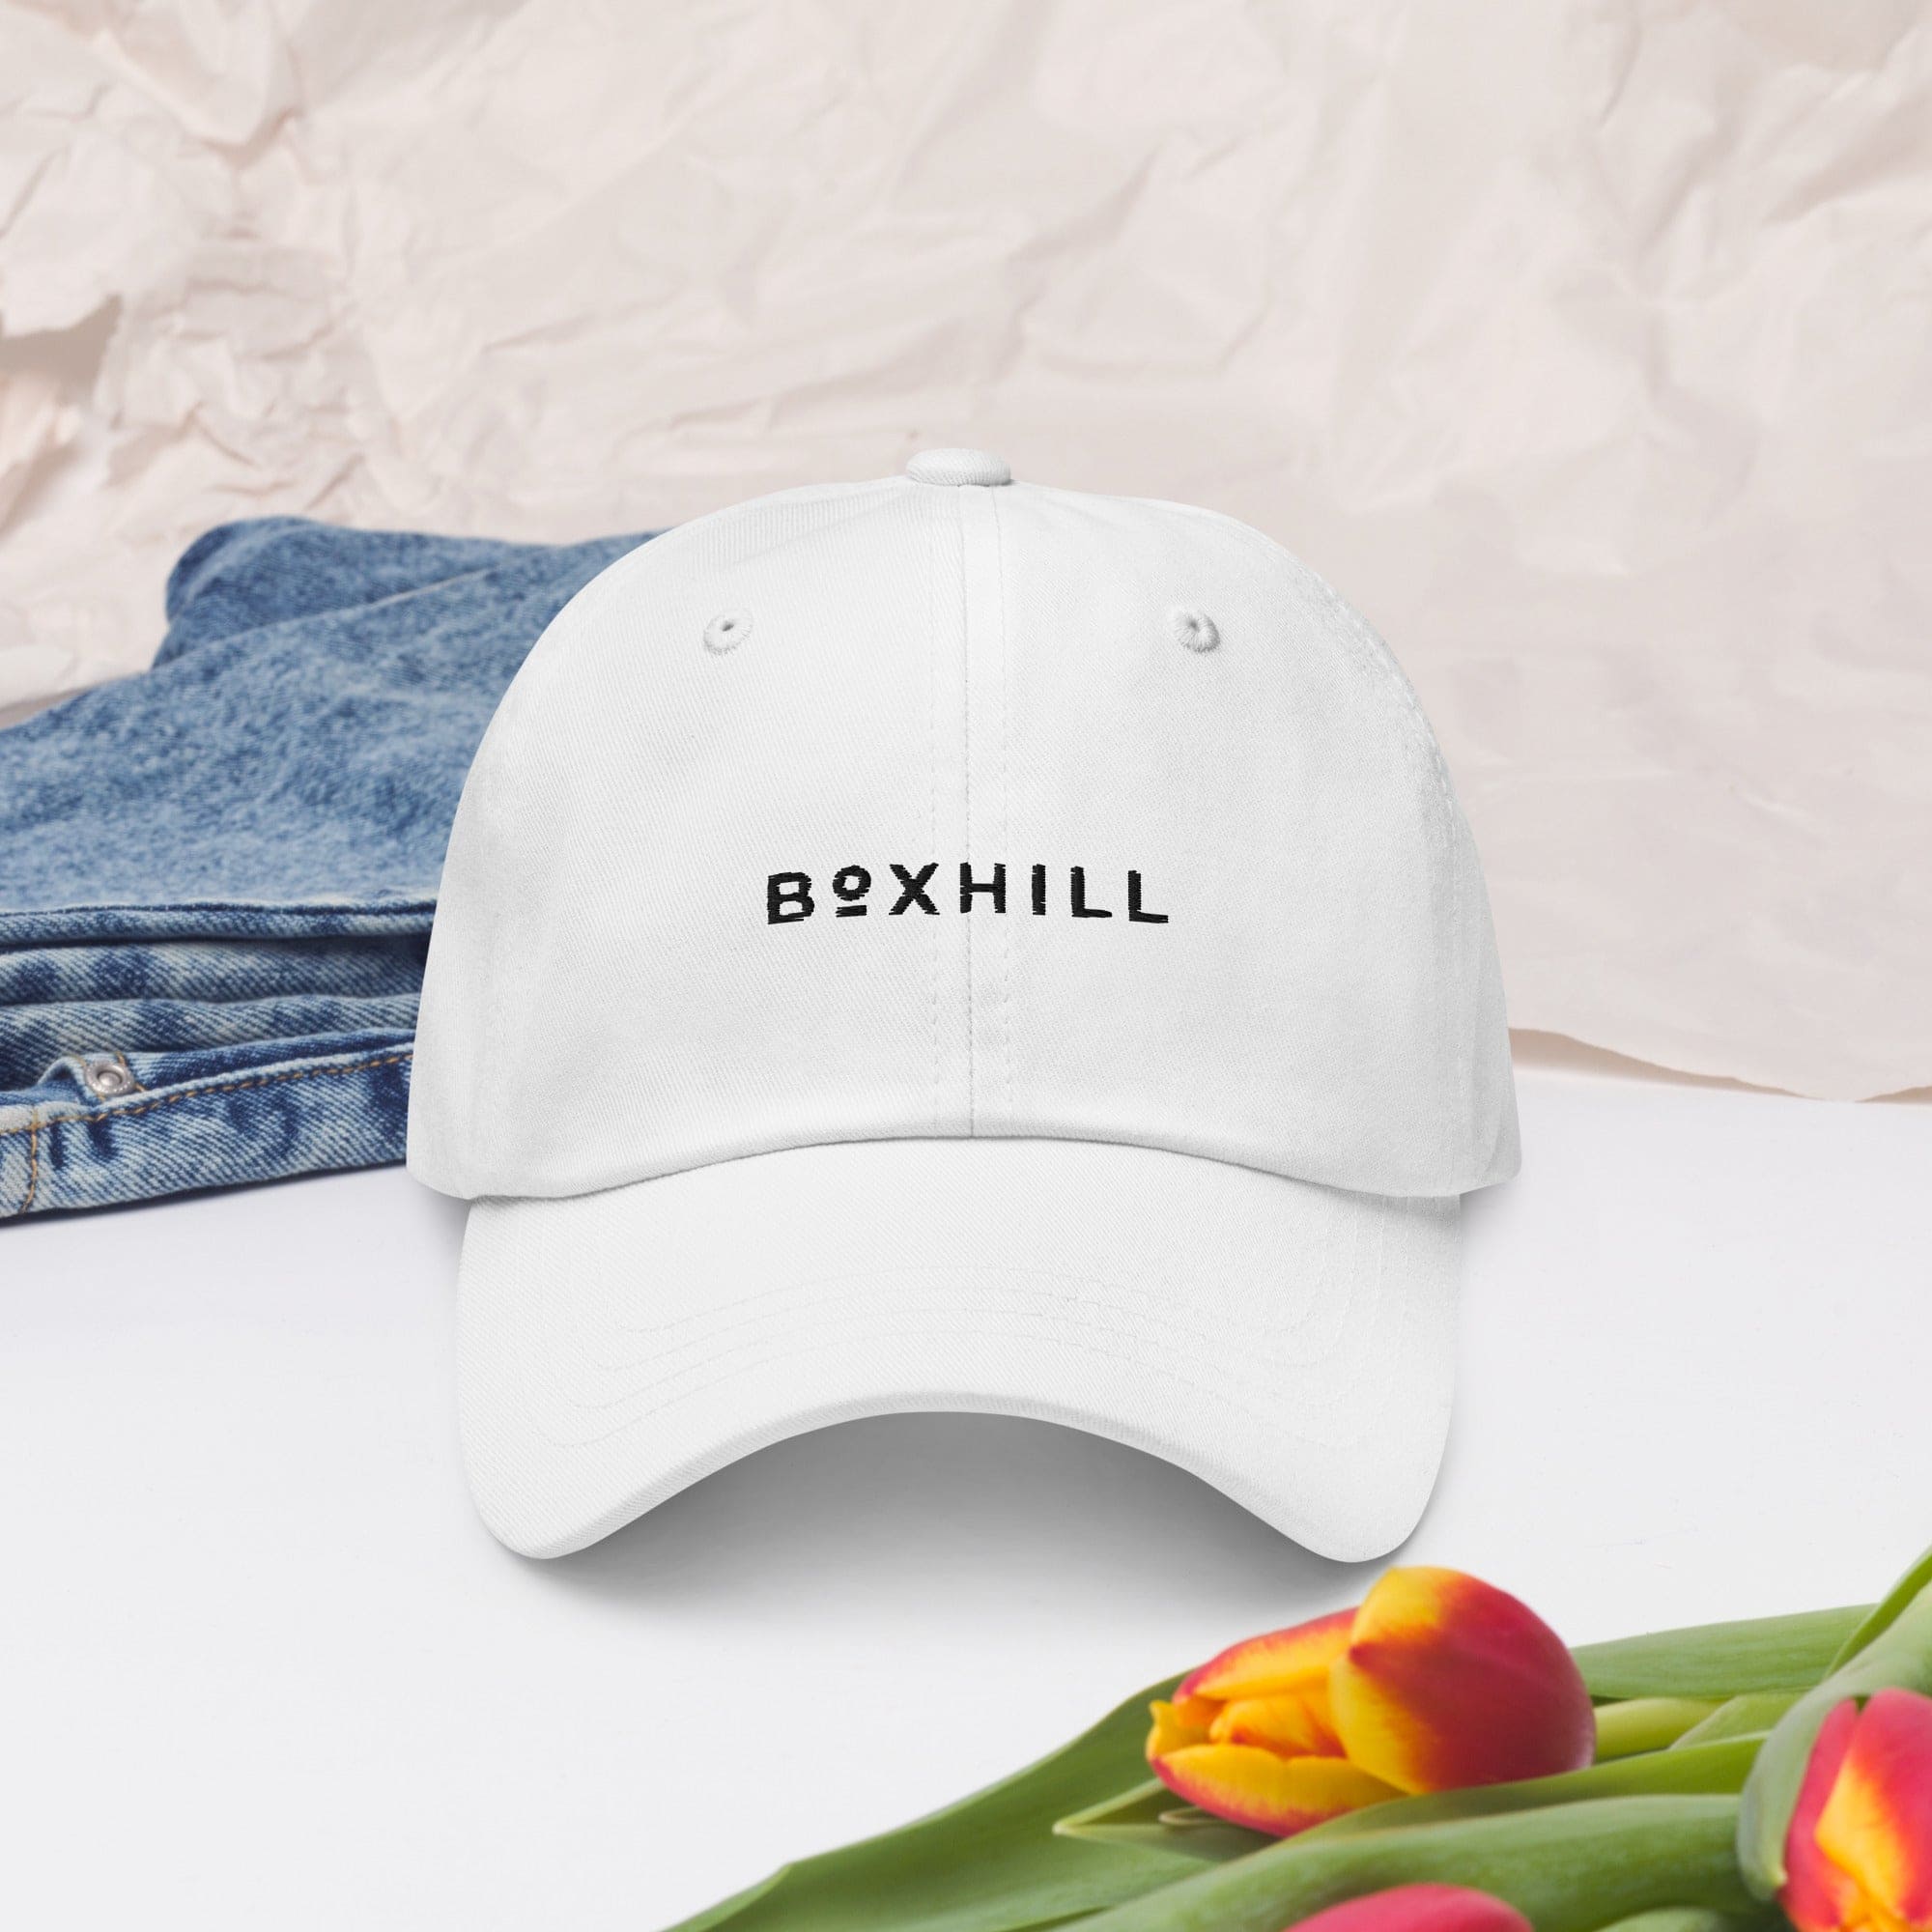 Boxhill's Minimalist White Hat with jeans and plain back ground